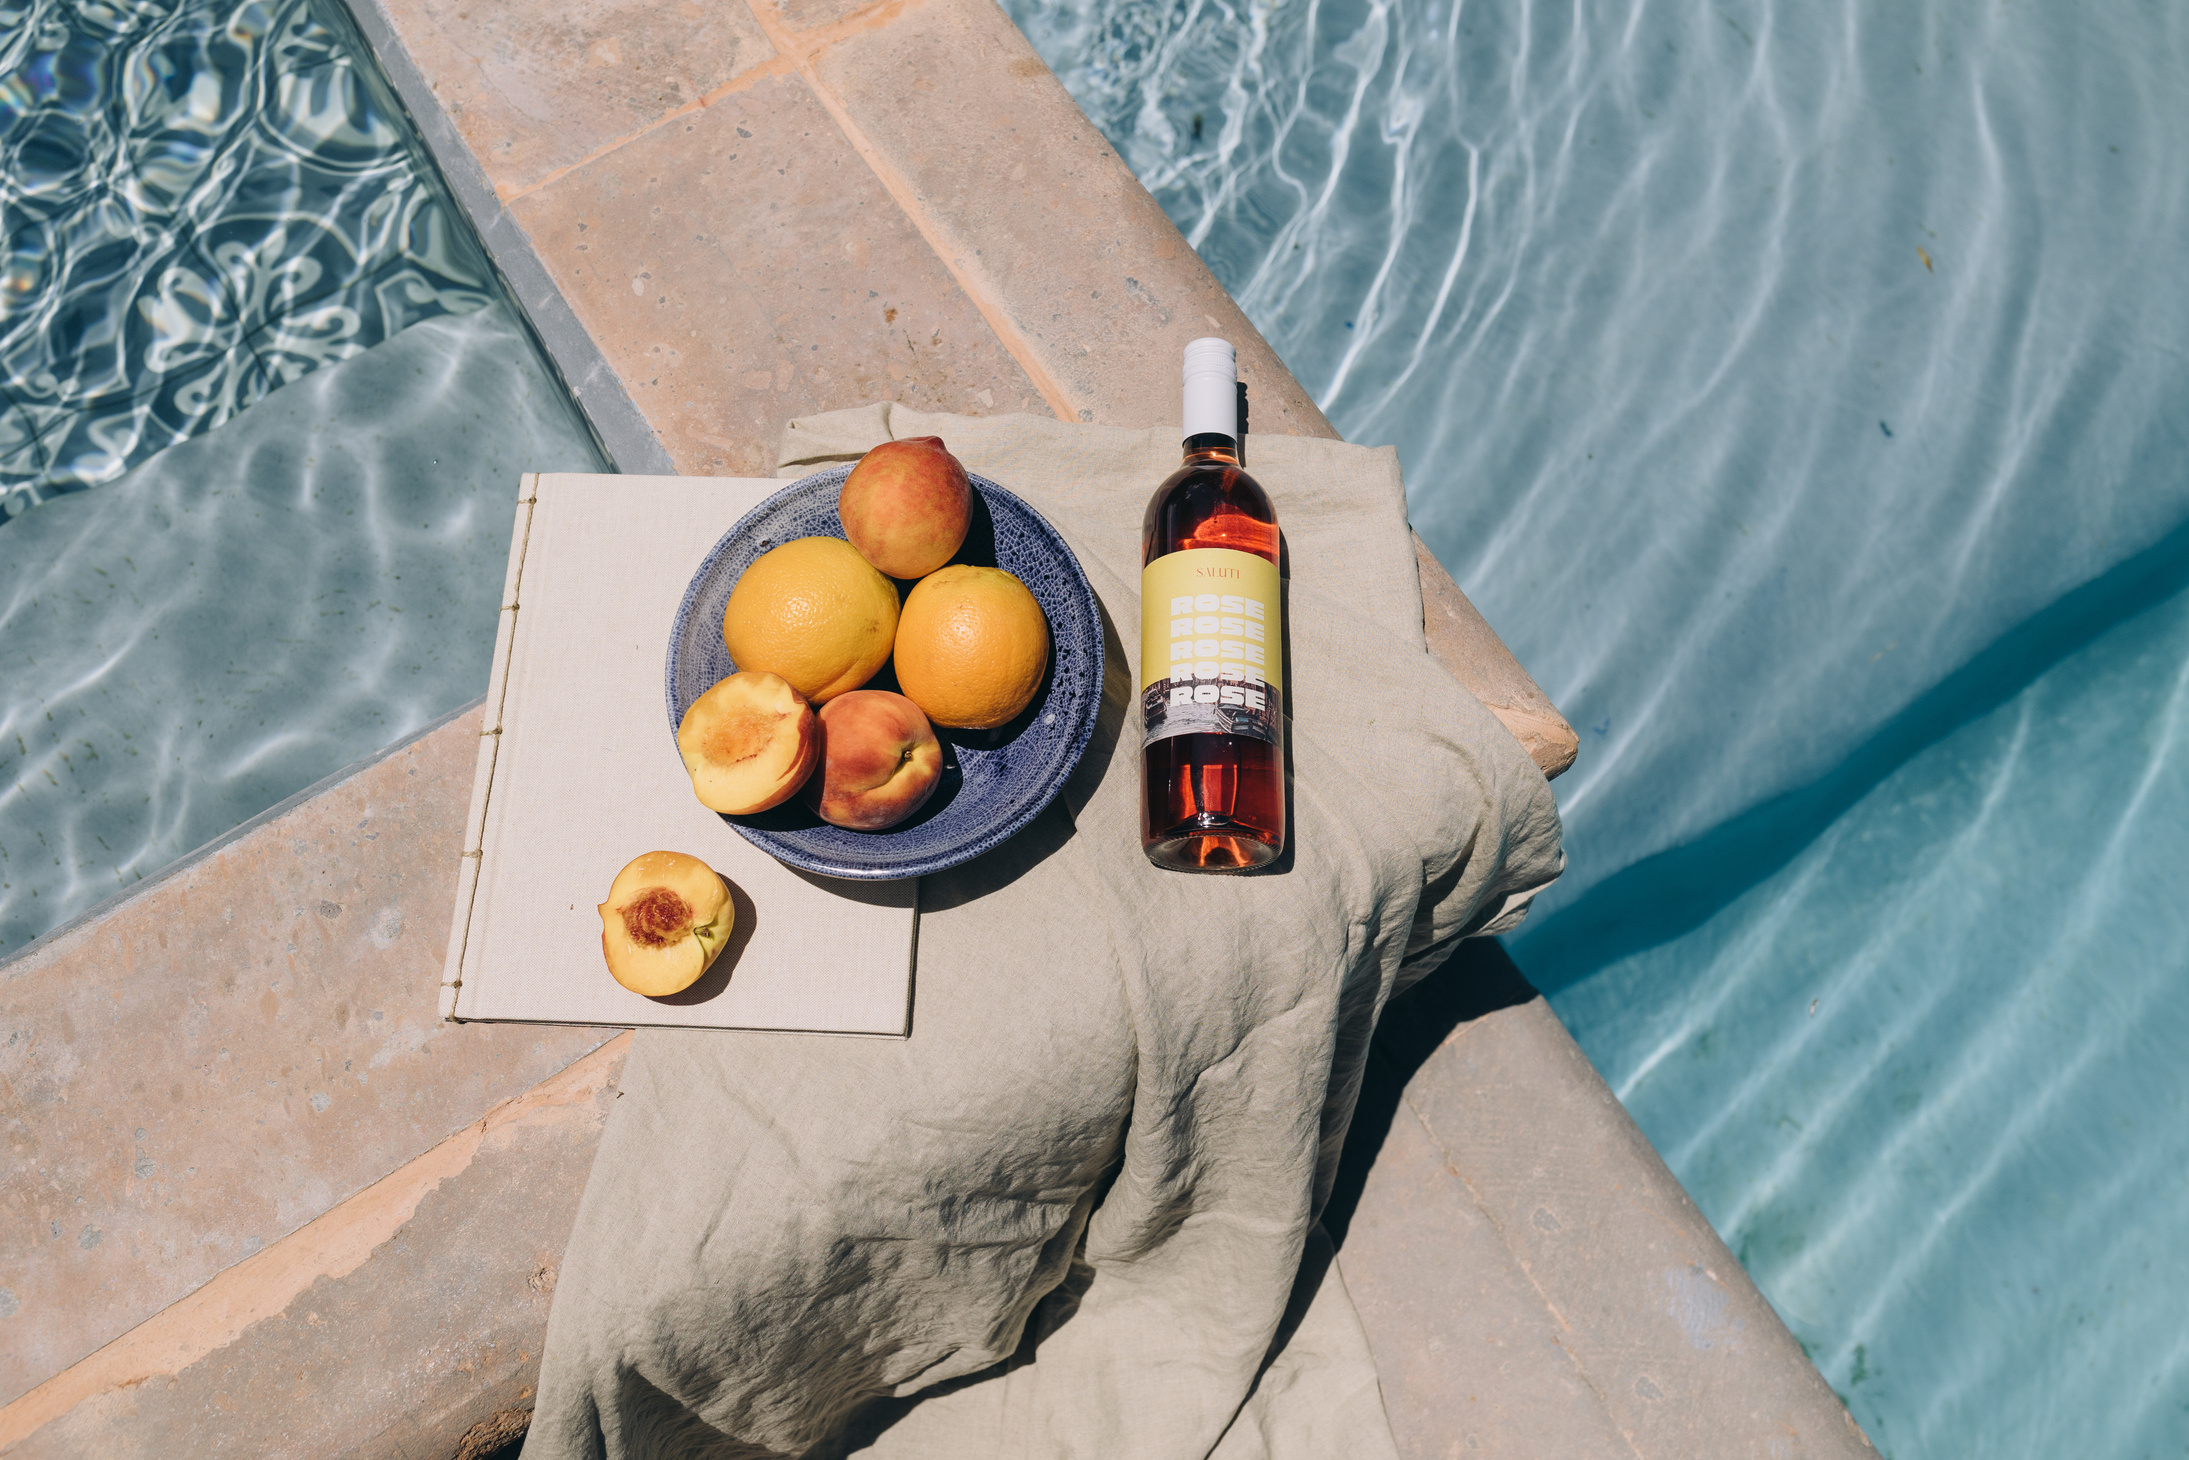 Peaches and Bottle of Wine by the Swimming Pool